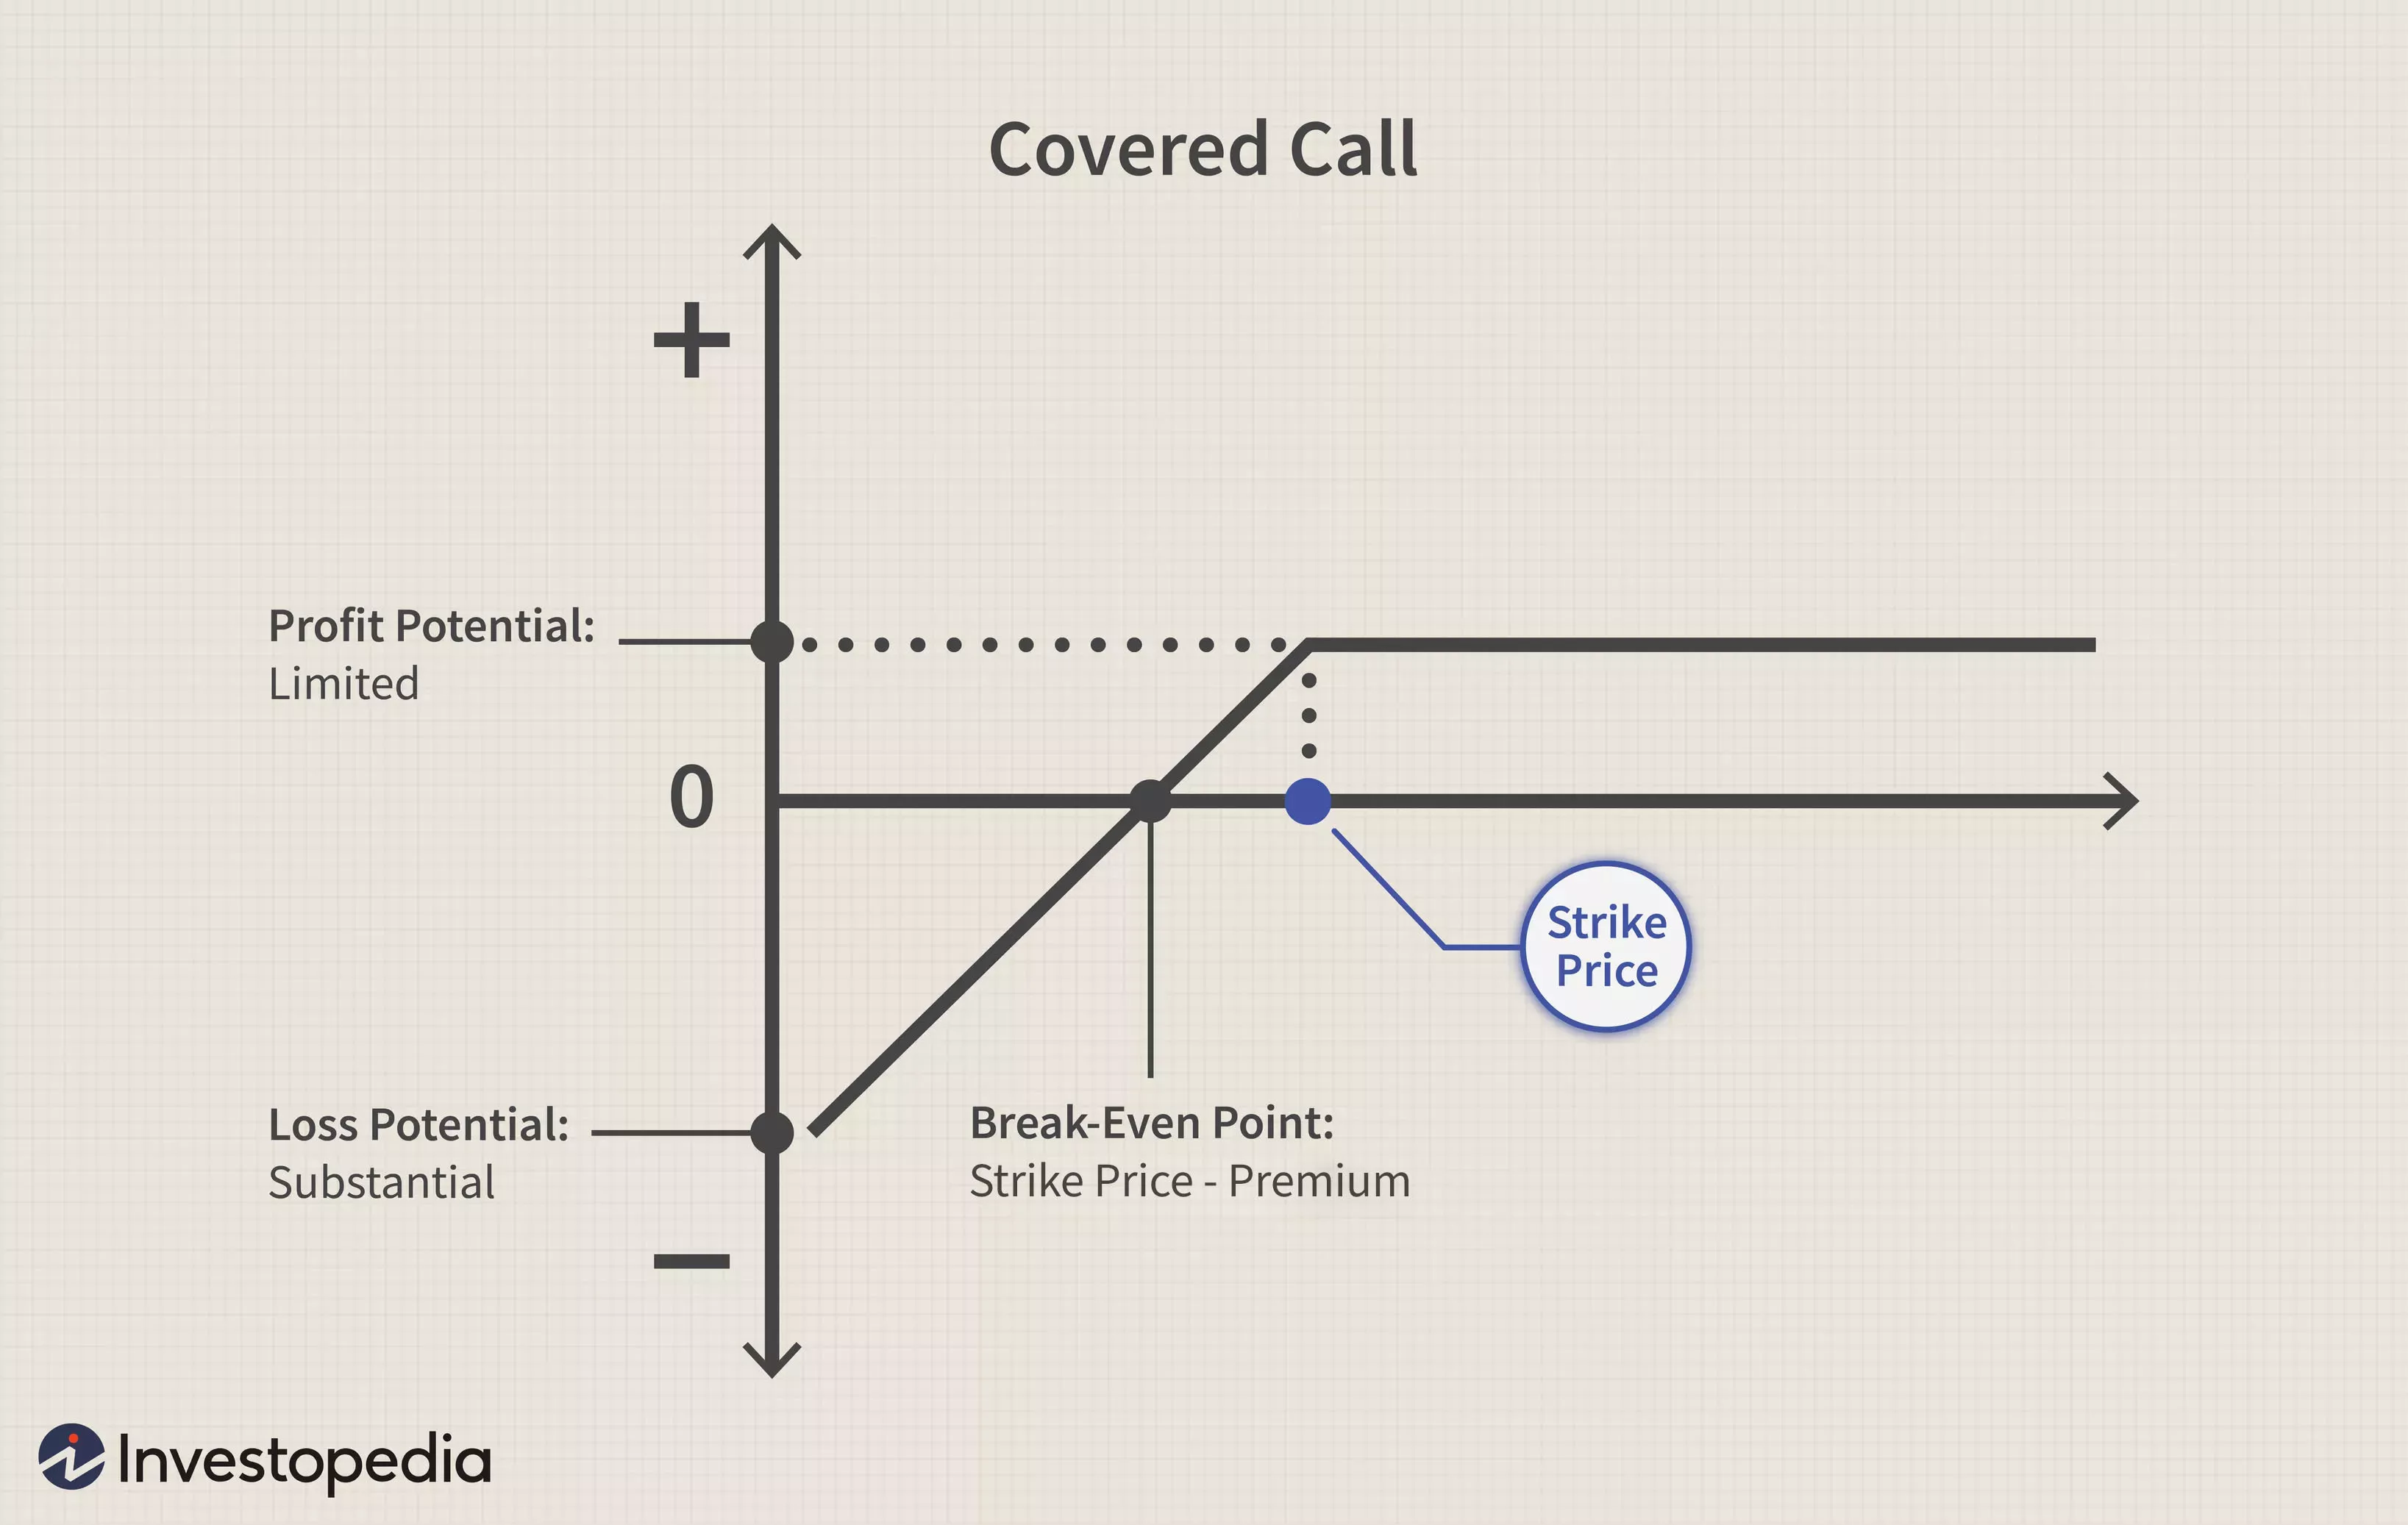 Covered Call Payoff Graph. Investopedia.com.